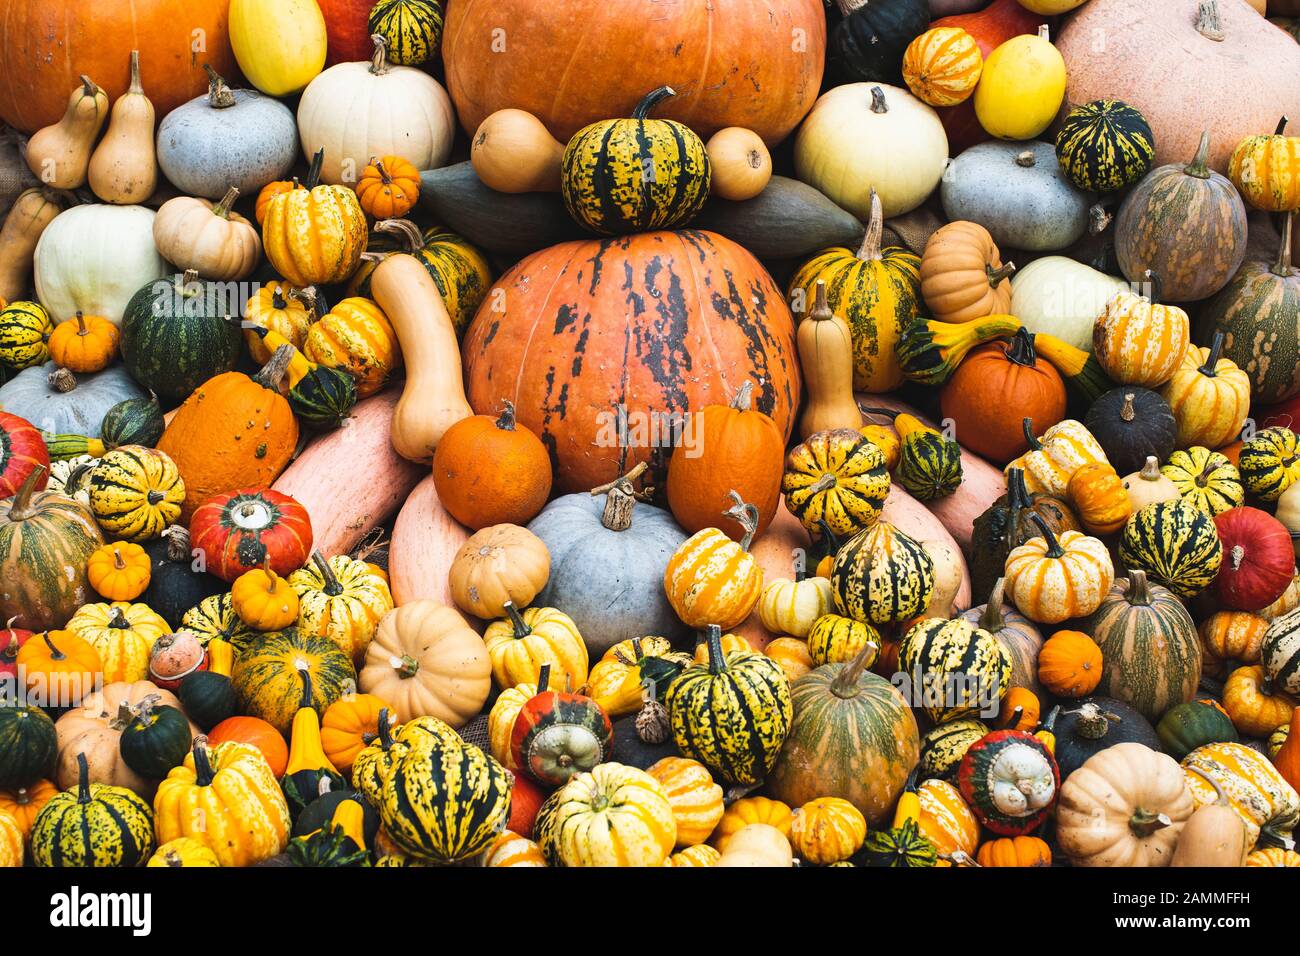 Large pile of pumpkins, squashes and gourds. Stock Photo